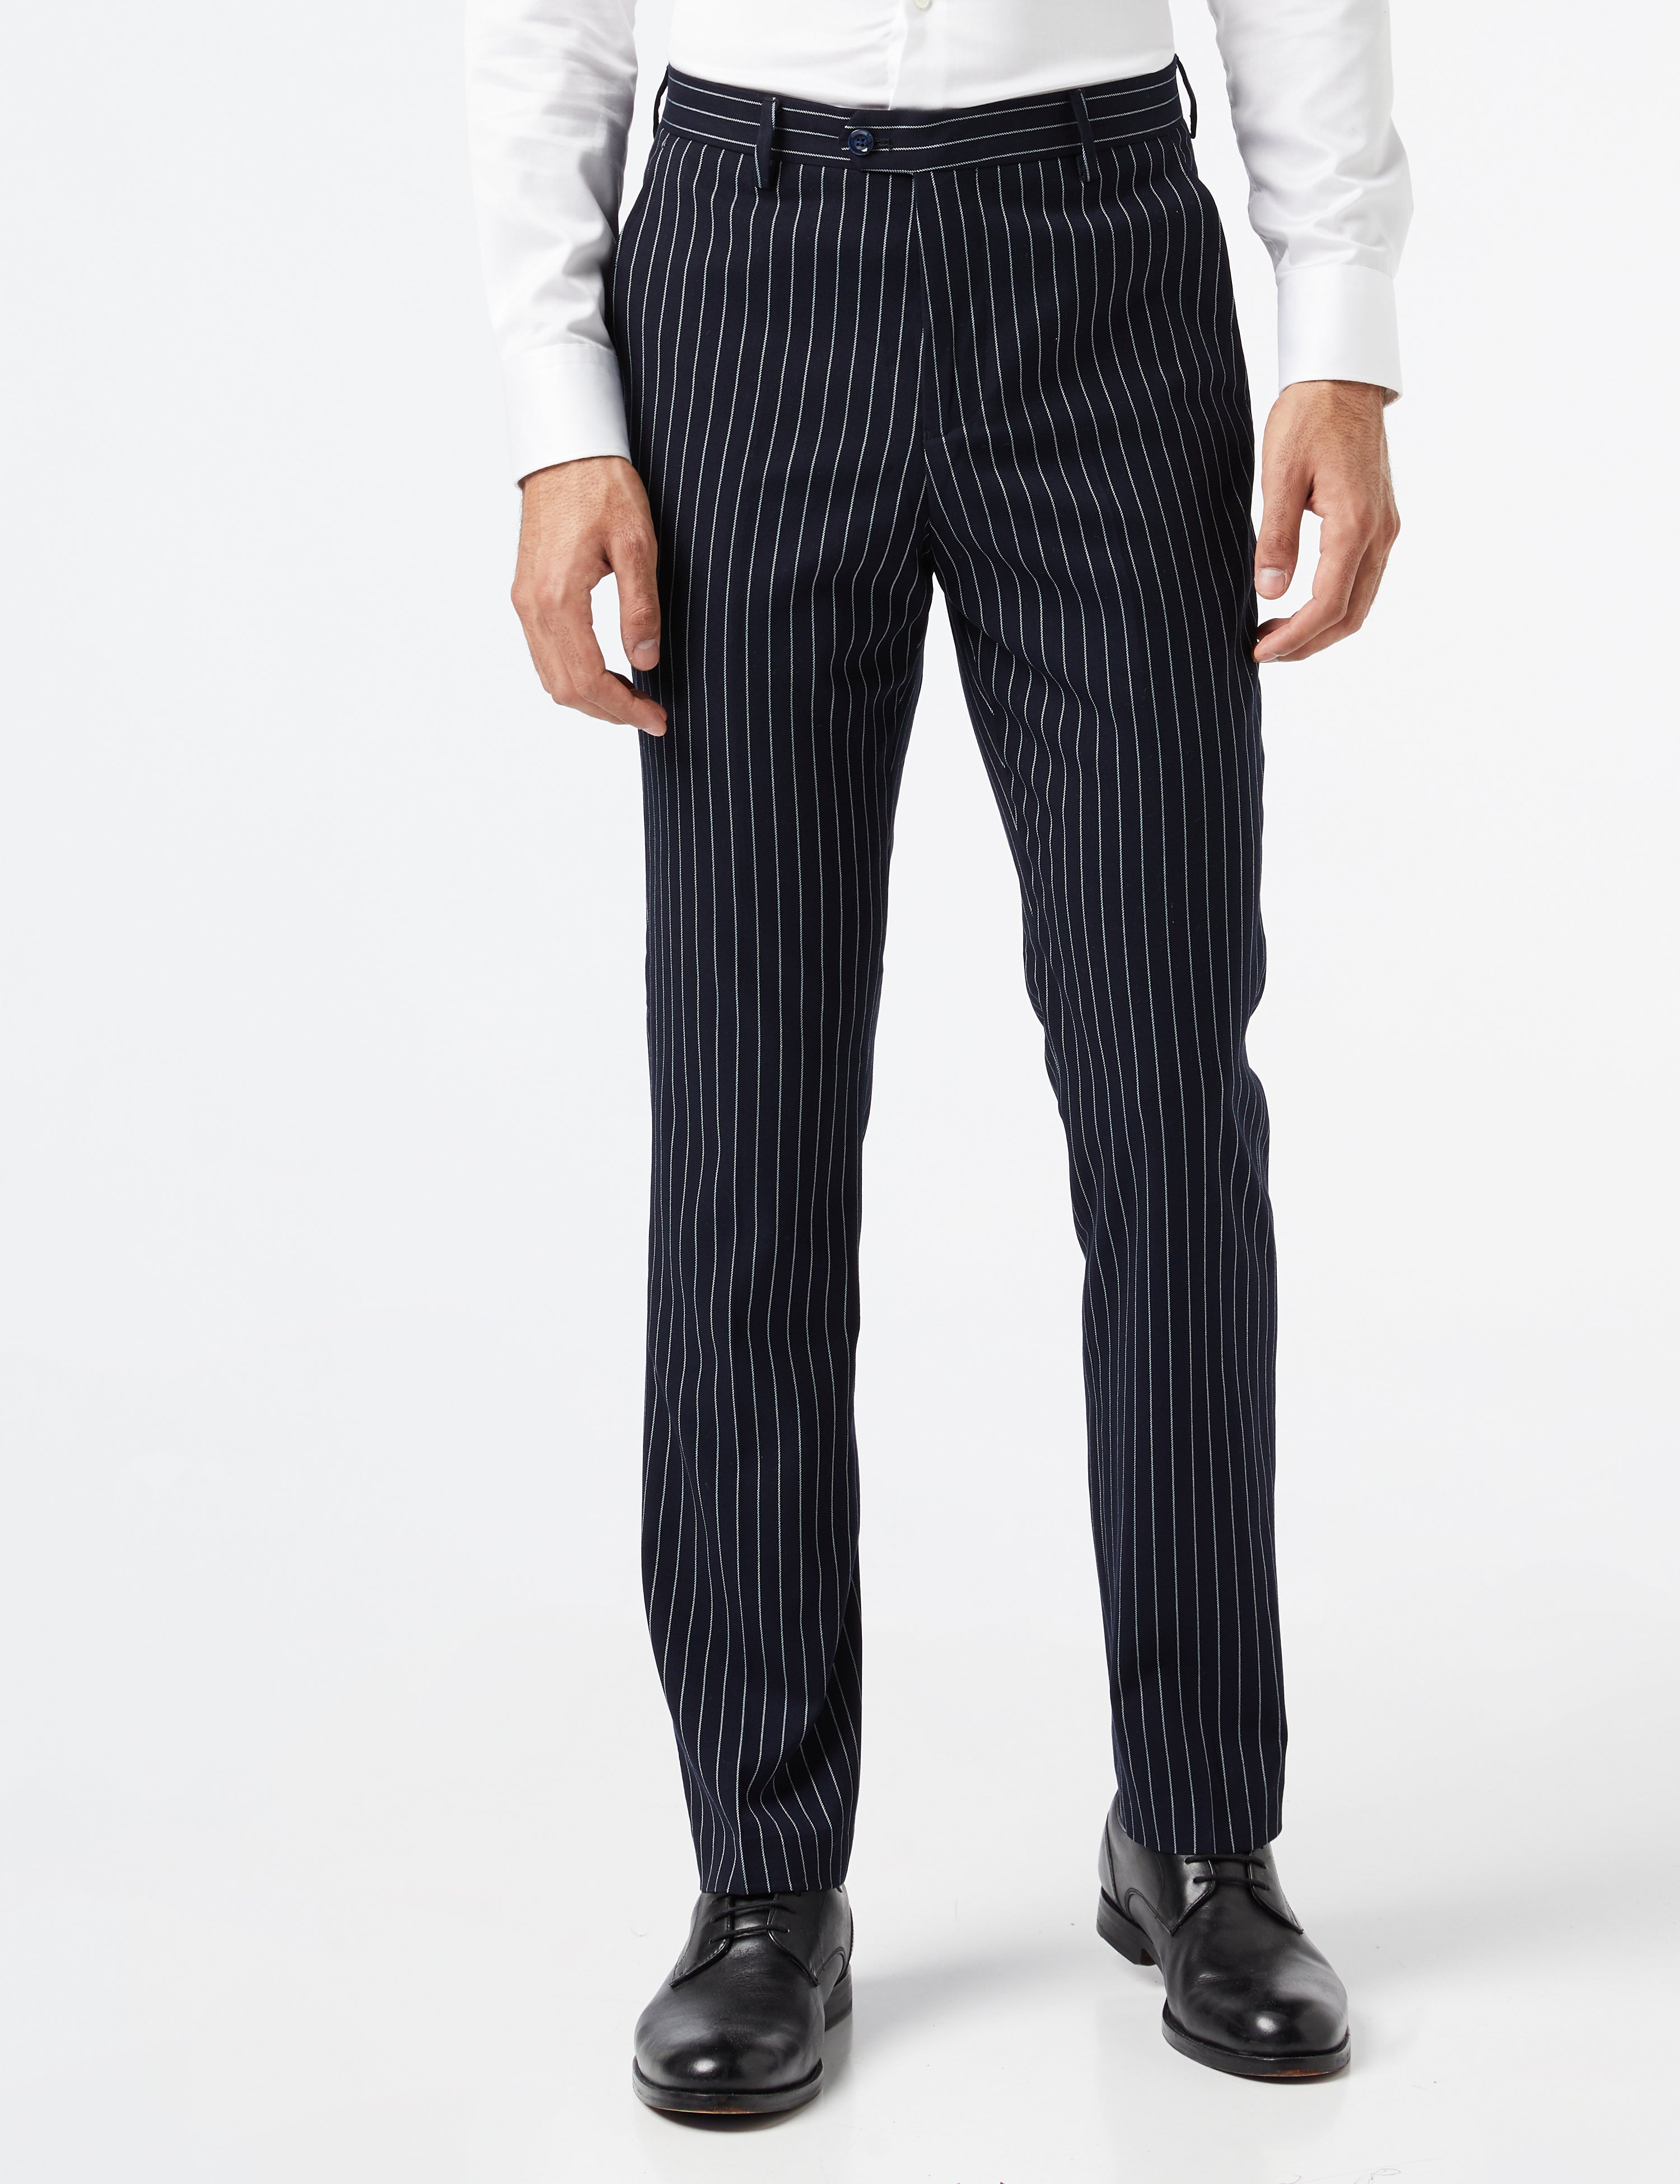 ALFRED - Navy Chalk Stripe Double Breasted Suit